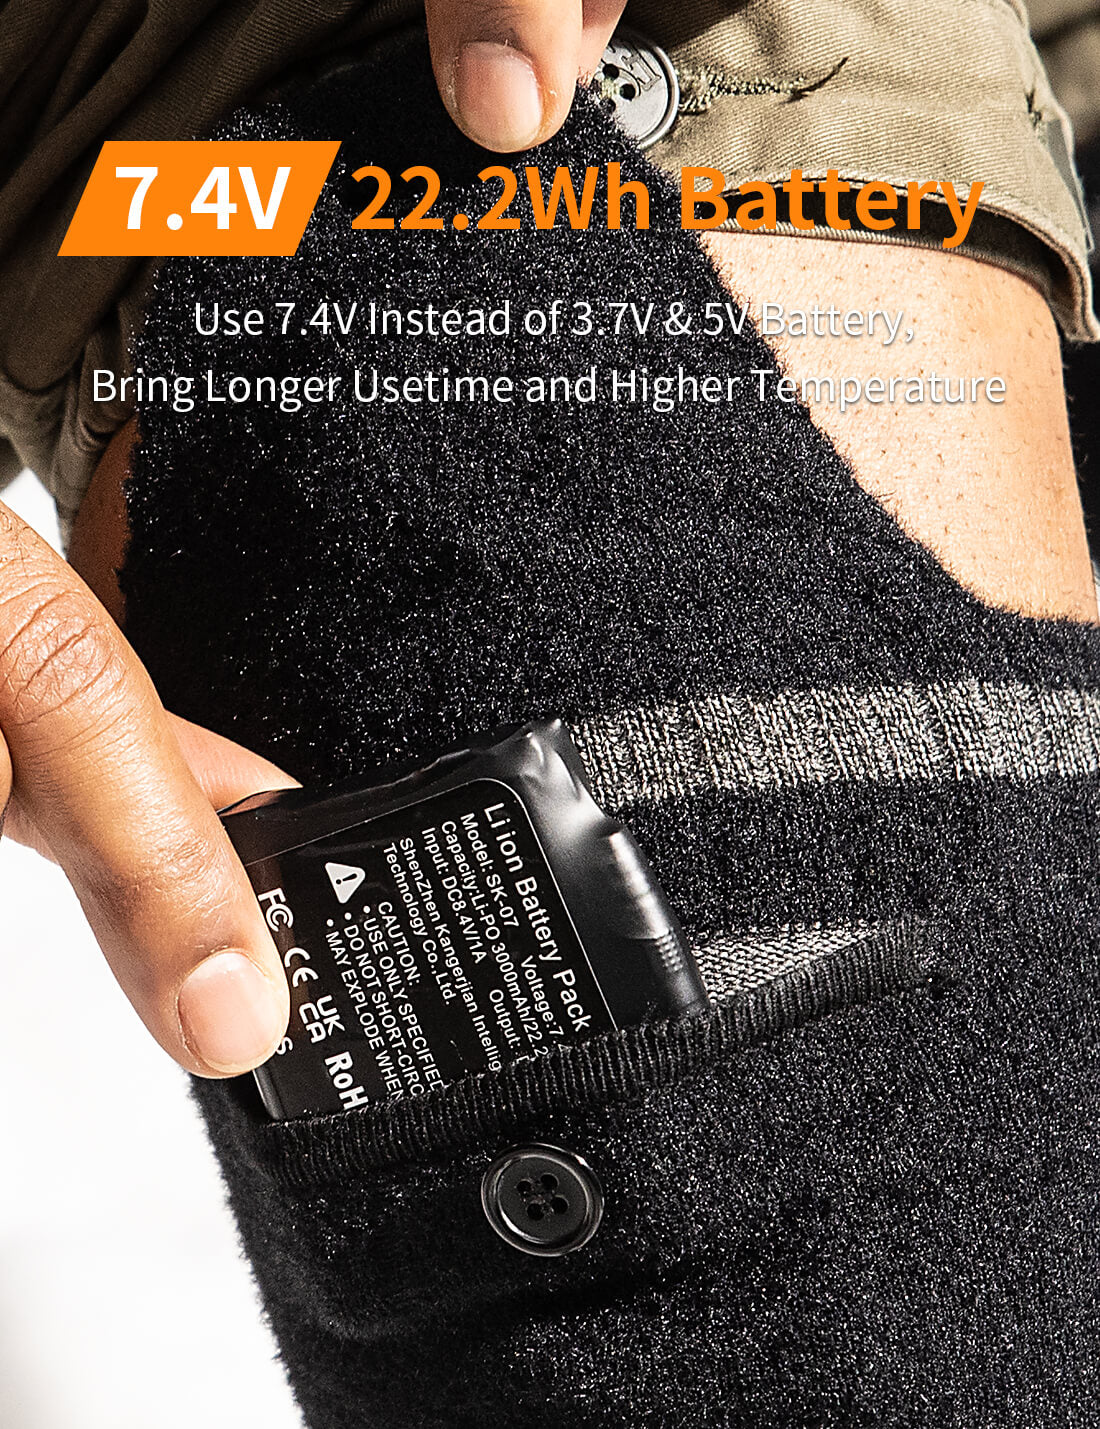 Dartwood Heated Socks, Rechargeable Battery